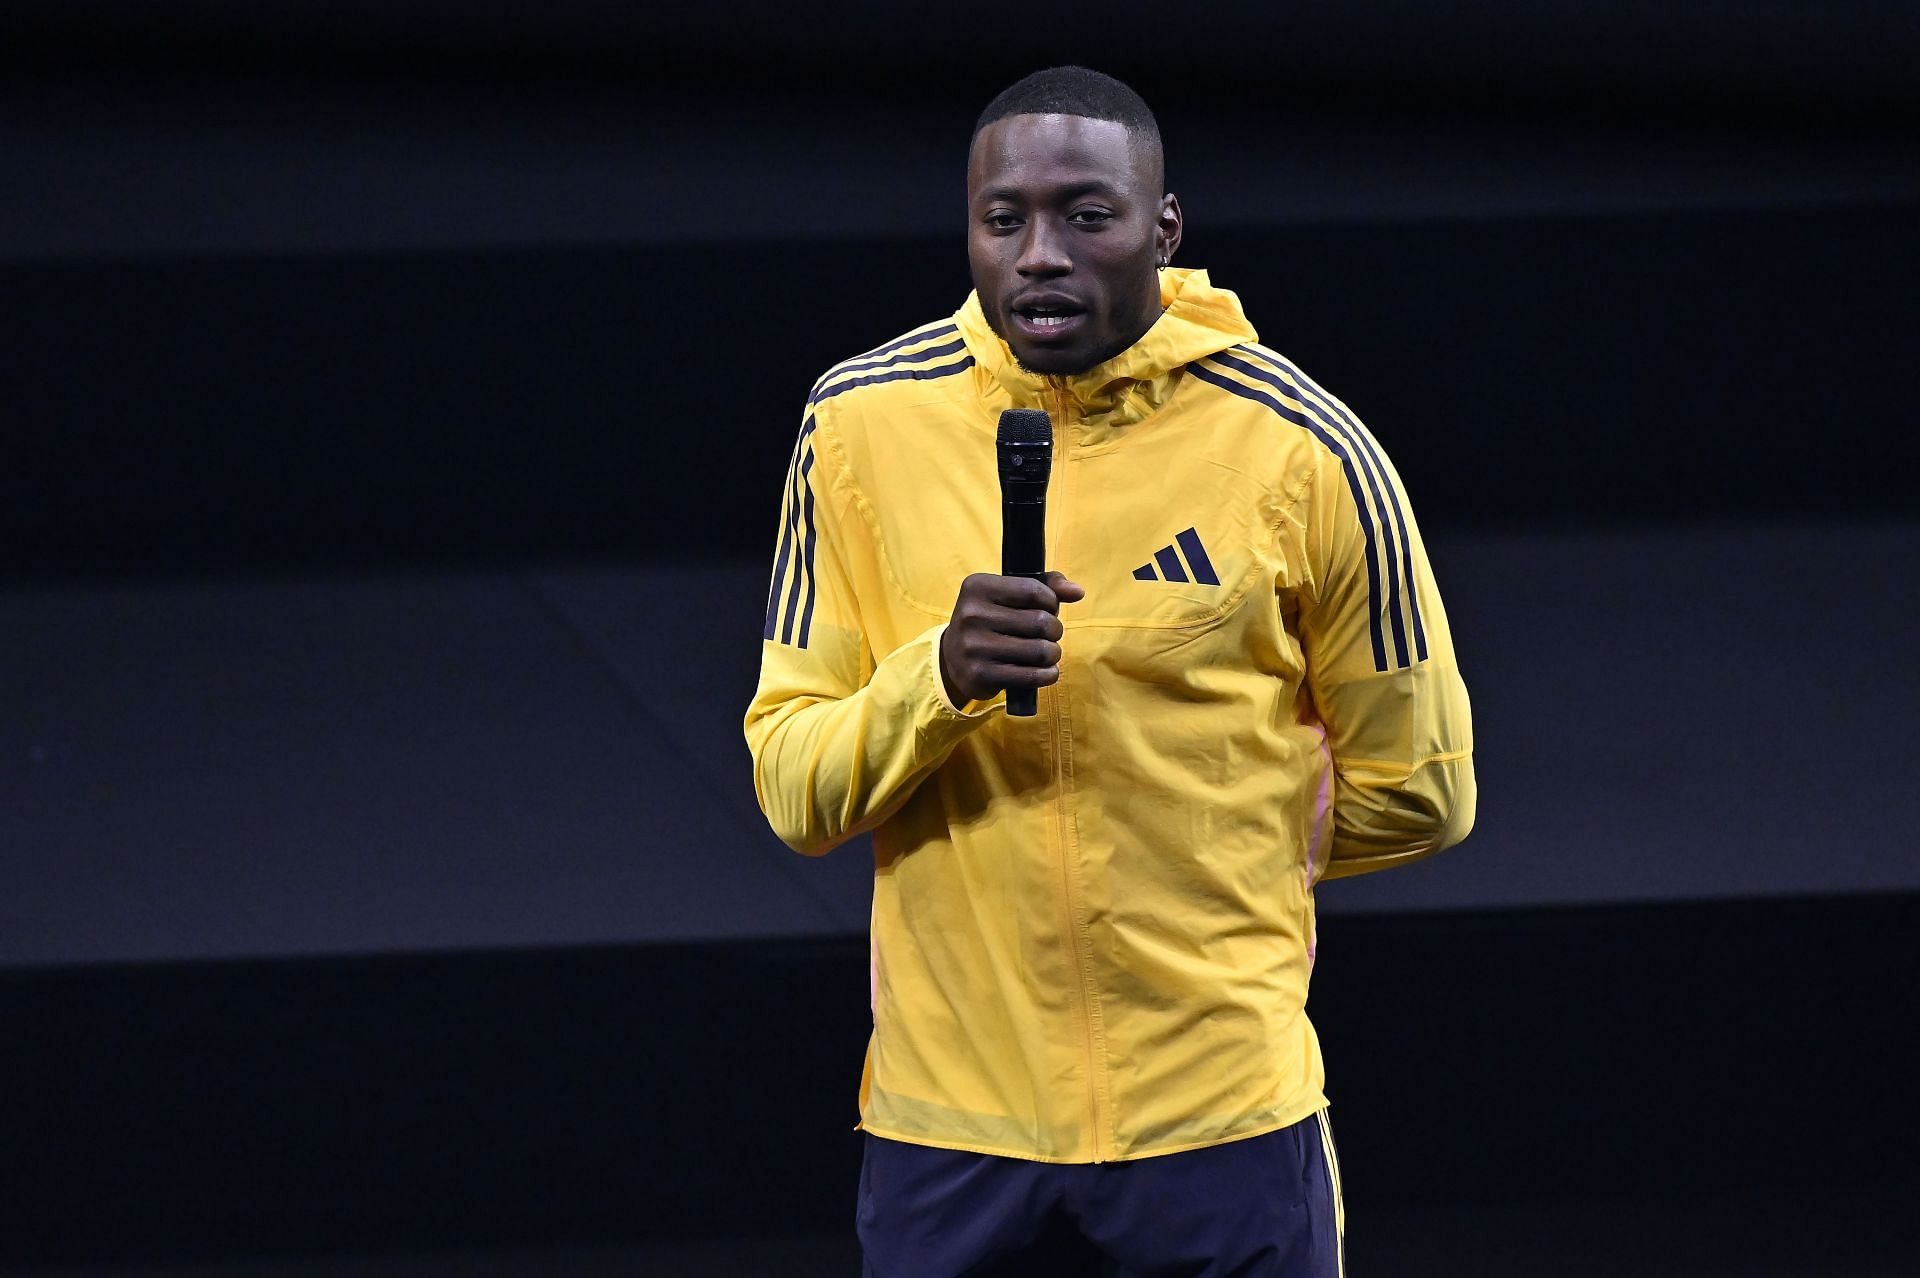 Grant Holloway at the Adidas Paris 2024 Collection Reveal event.